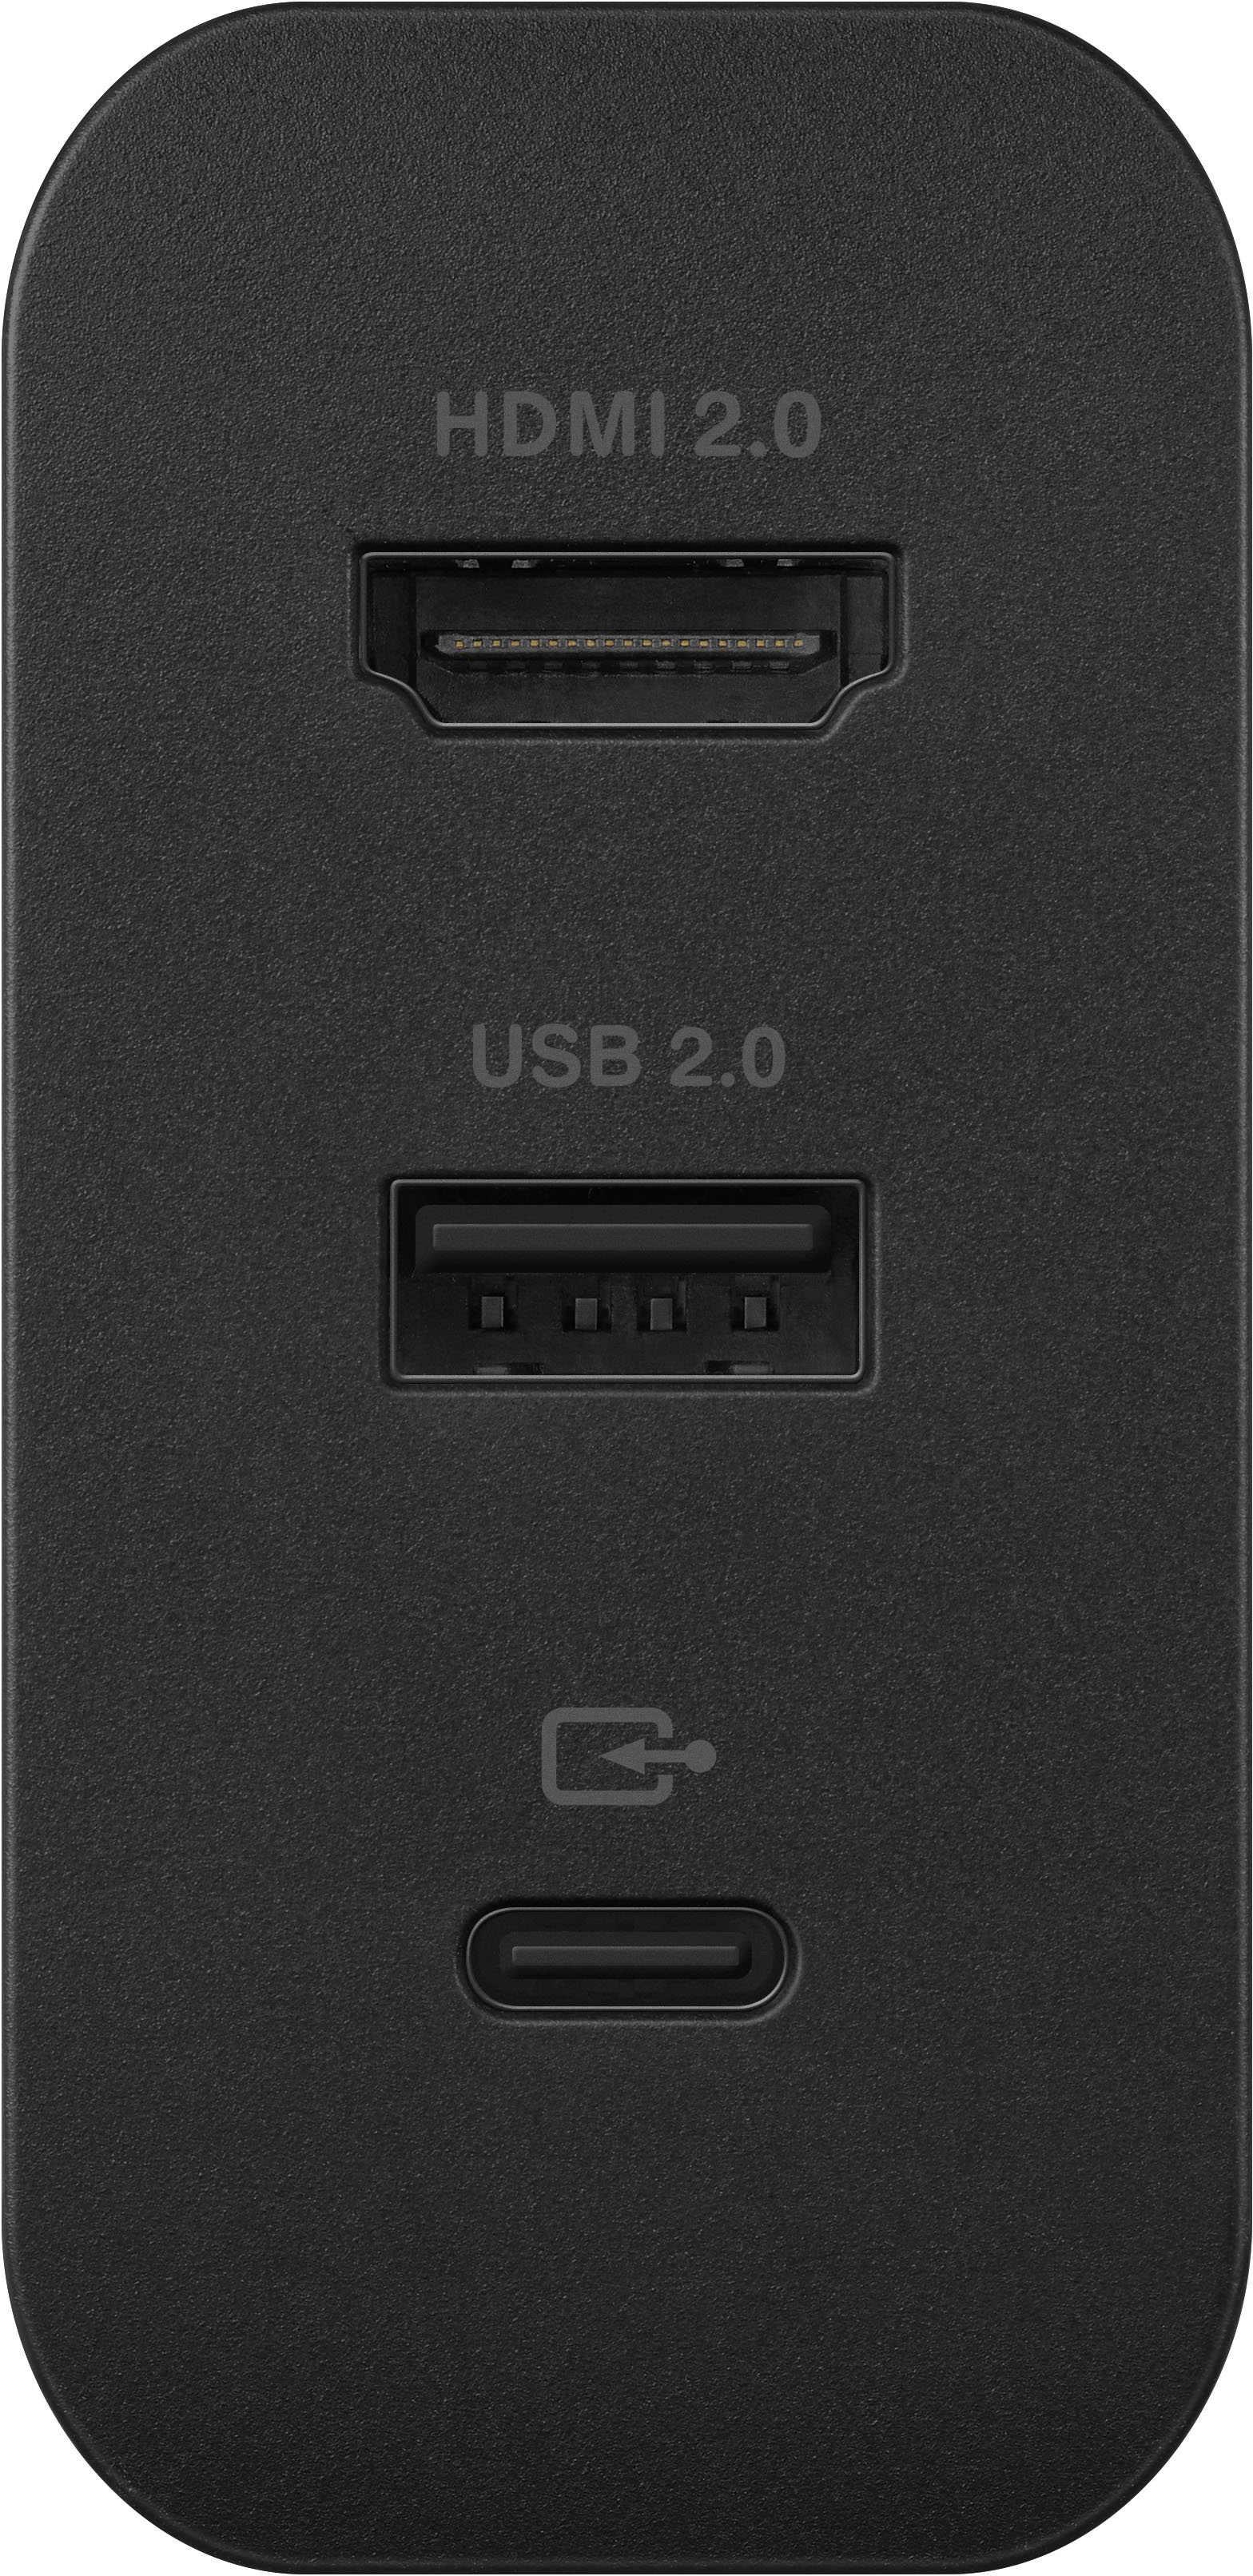 ASUS ROG 65W Charger Dock Supports HDMI 2.0 with USB Type-A and USB Type-C  for ROG Ally Black ROG 65W Gaming Charger Dock - Best Buy